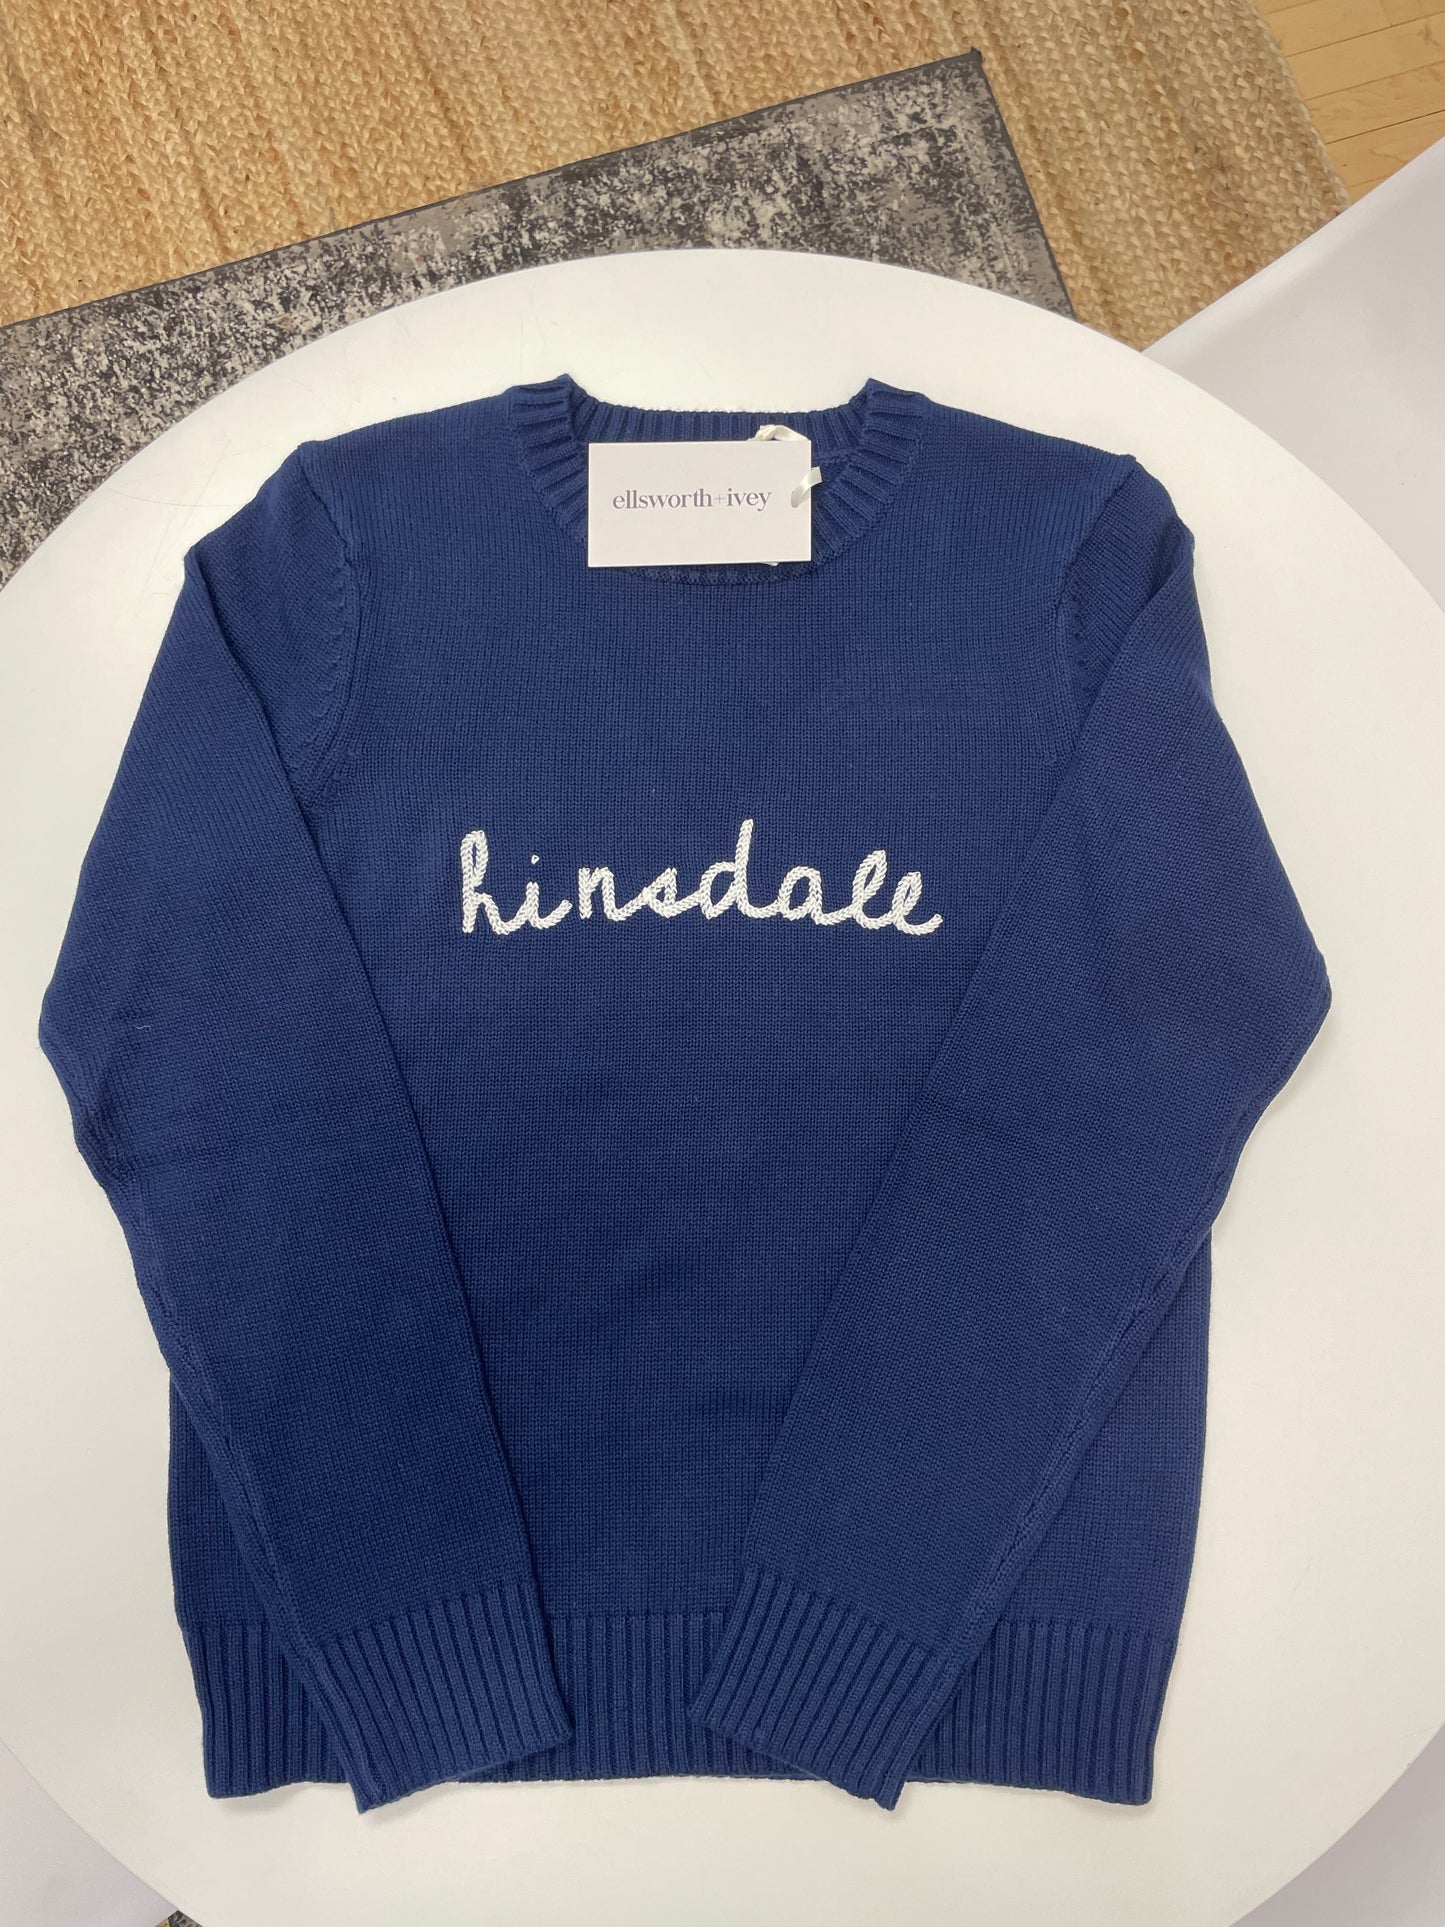 Hinsdale Knit Sweater - Navy - Game Set